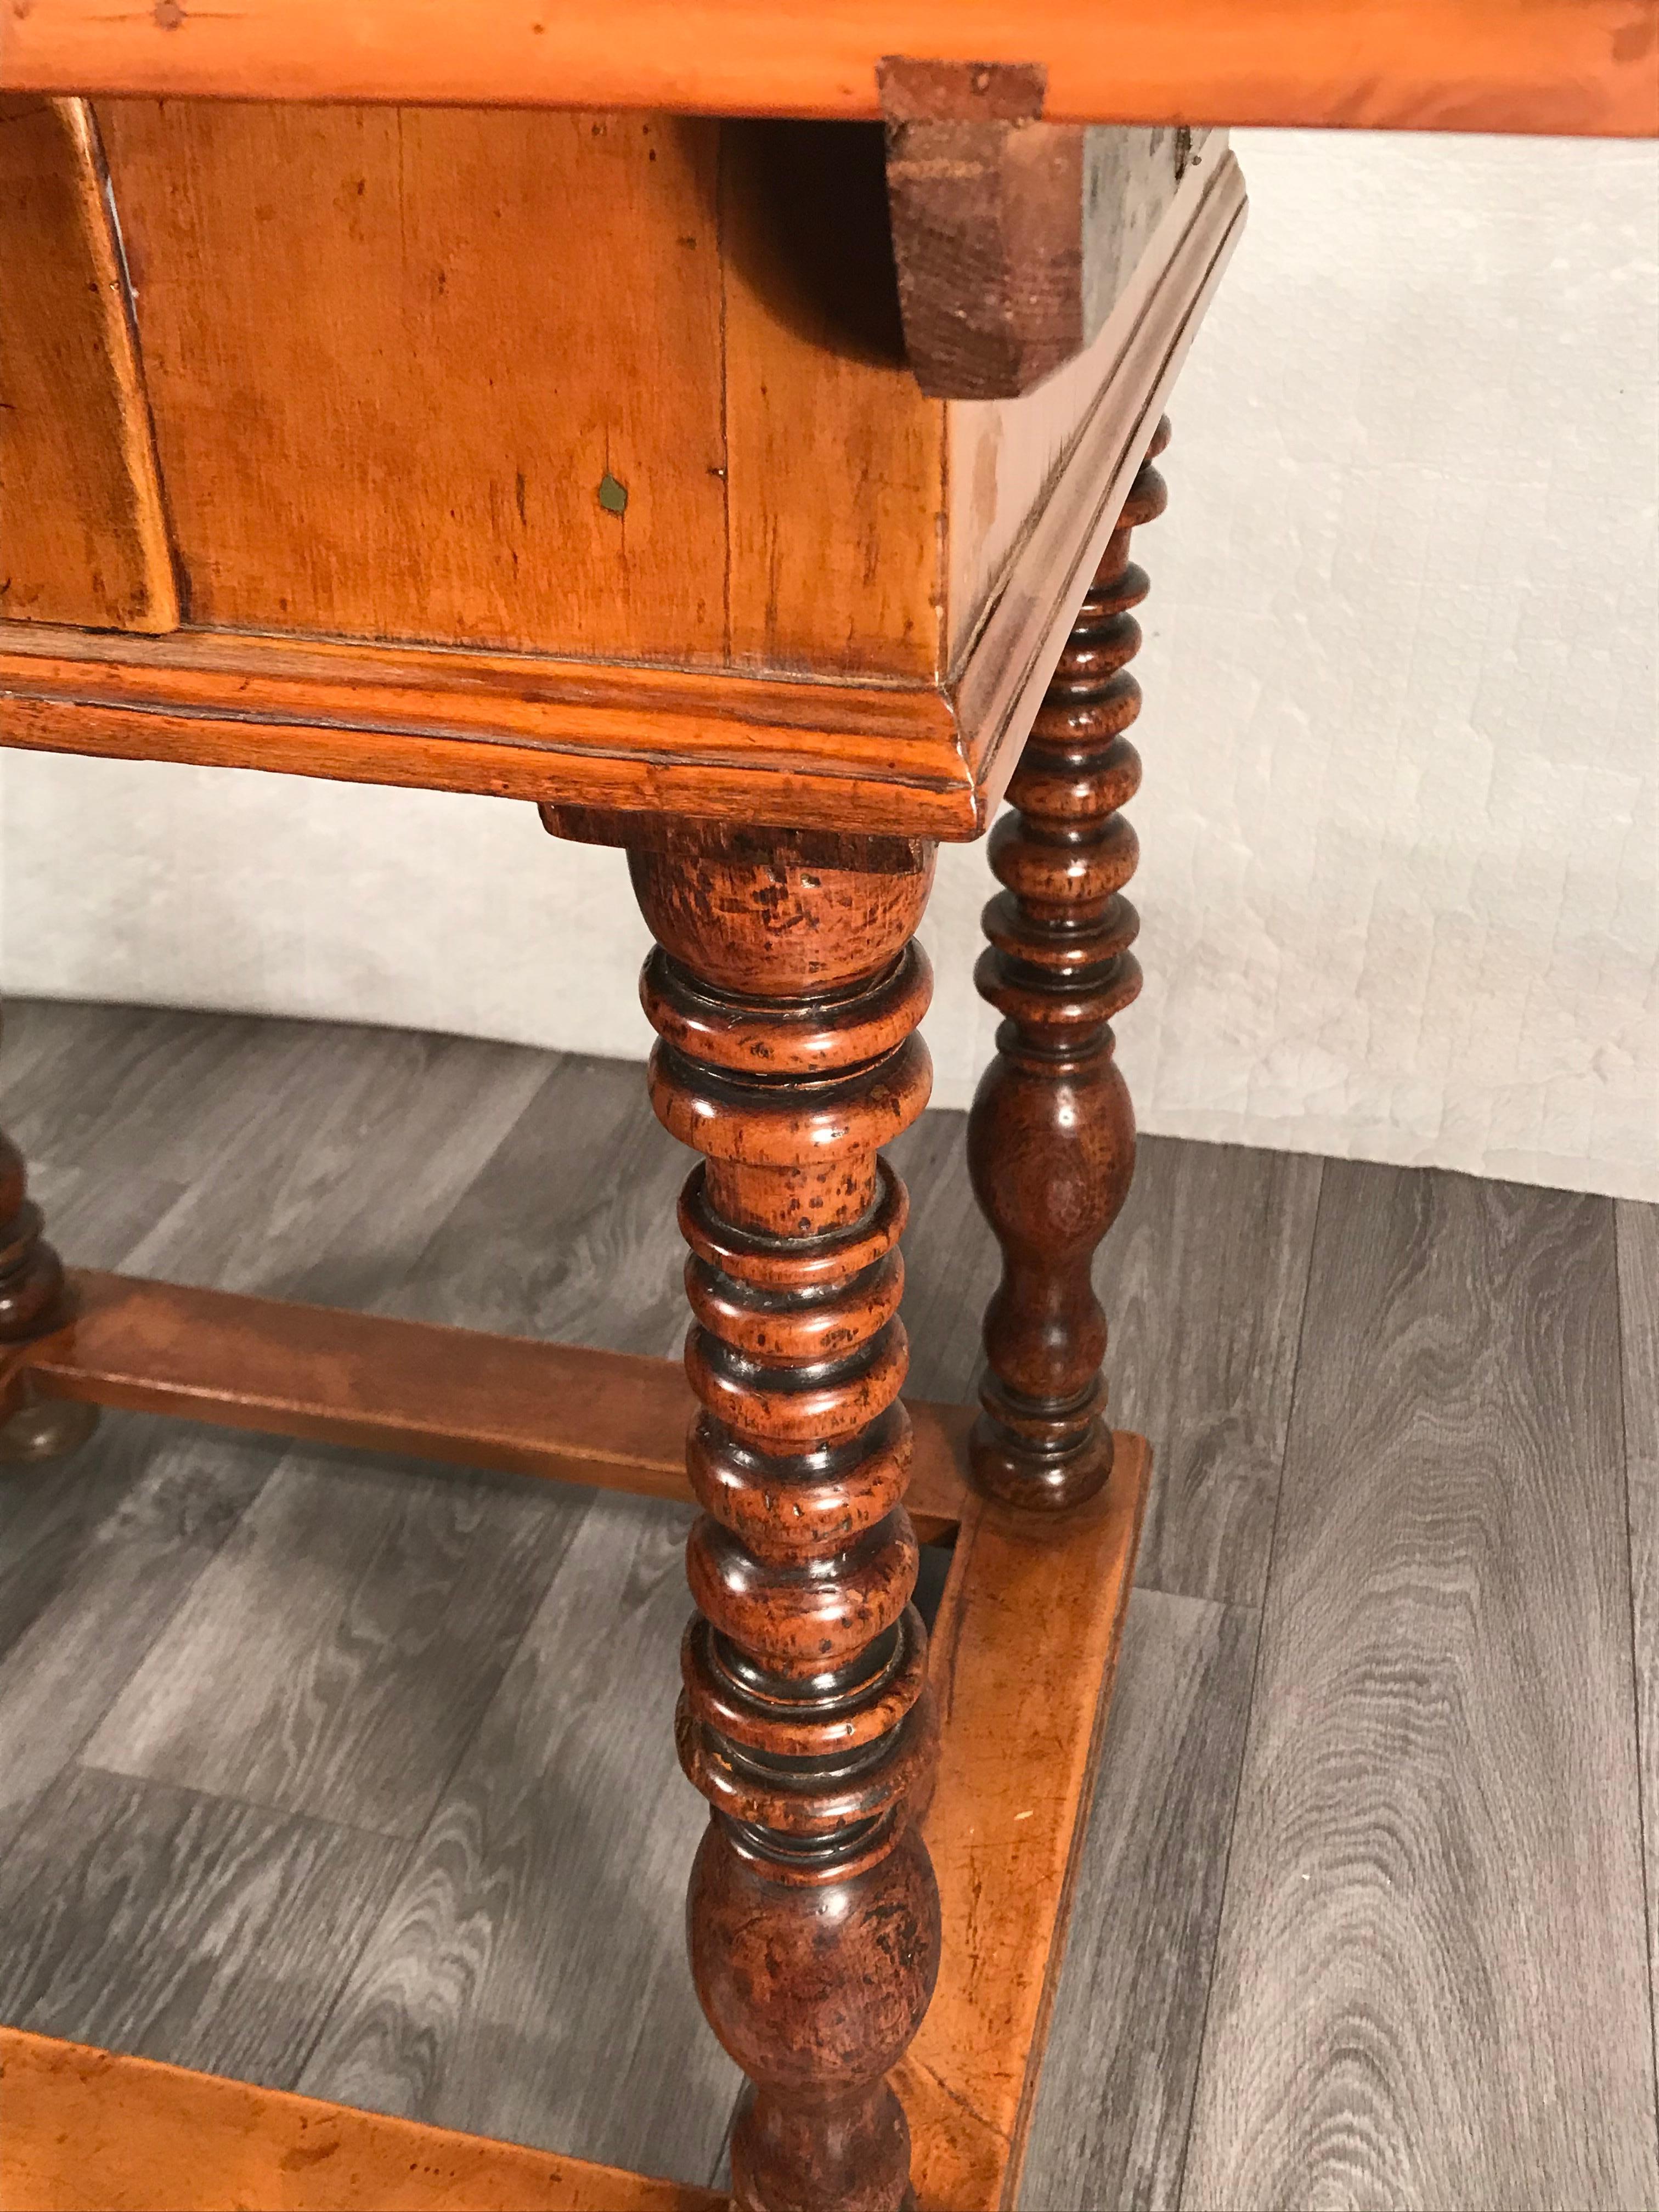 Hand-Carved Baroque Table, Southern Germany, Augsburg Region 1750, Walnut For Sale